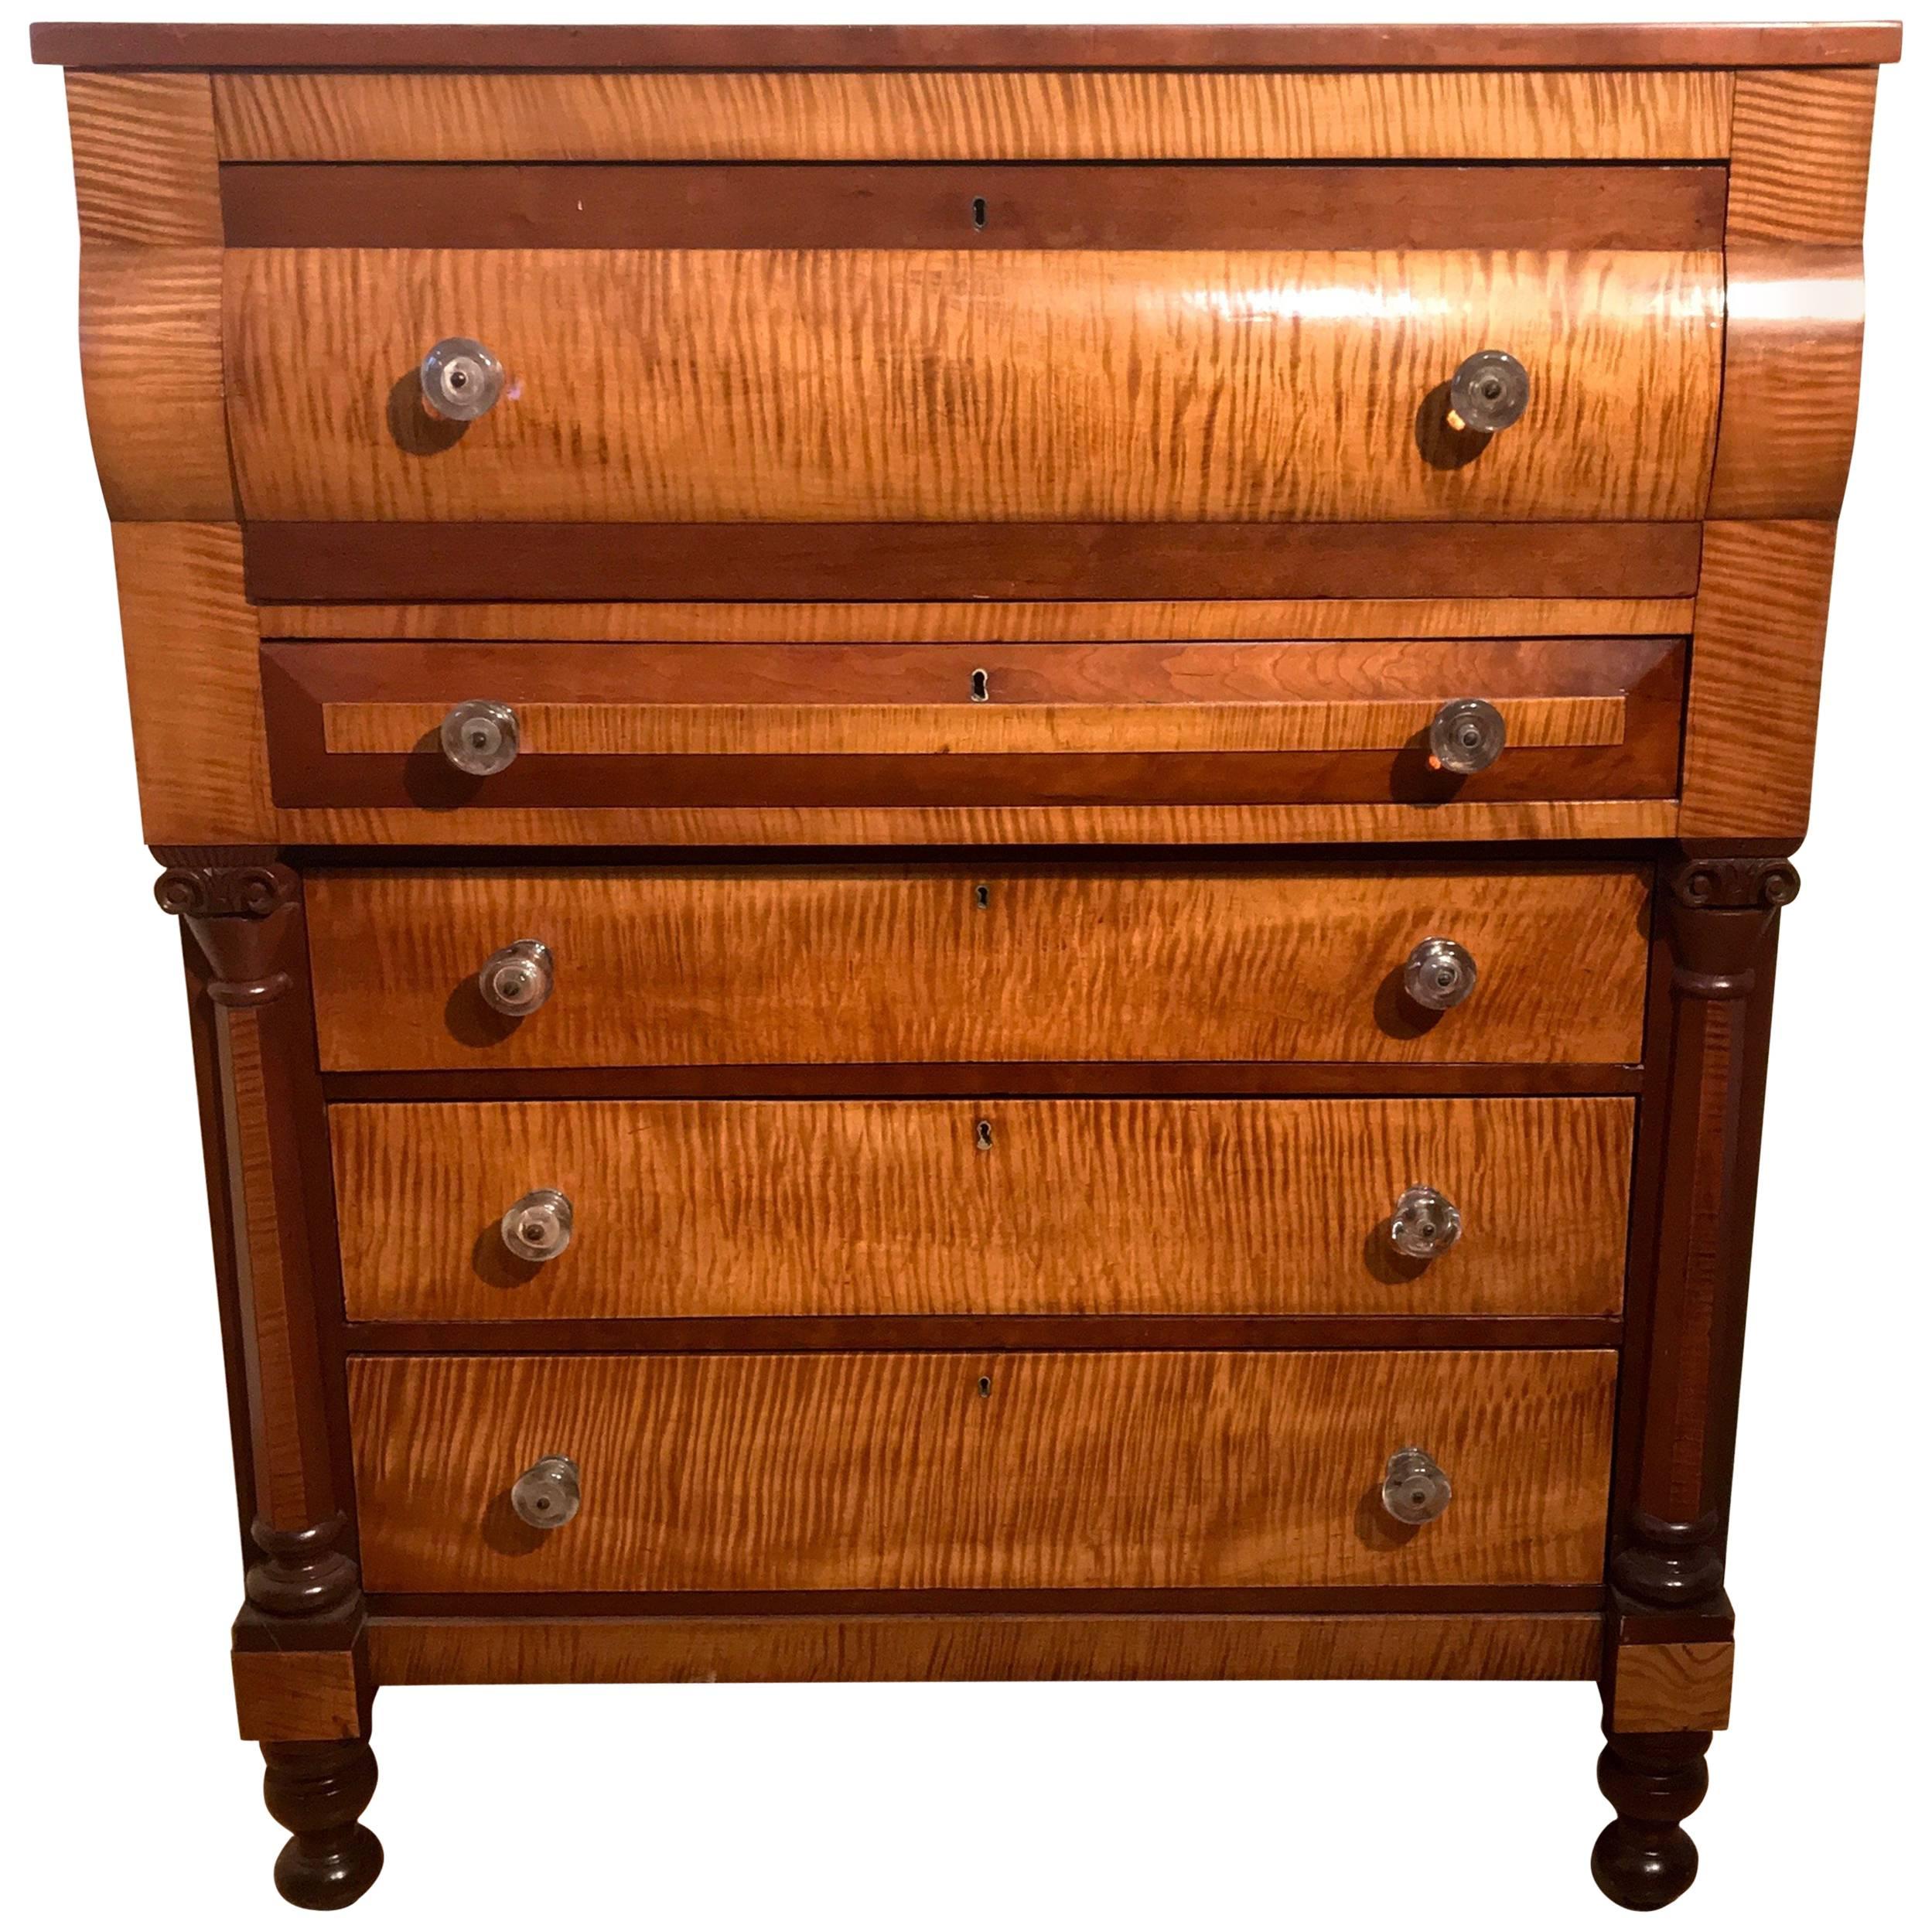 American Empire Chest of Drawers in Tiger Maple and Cherry, circa 1840 For Sale